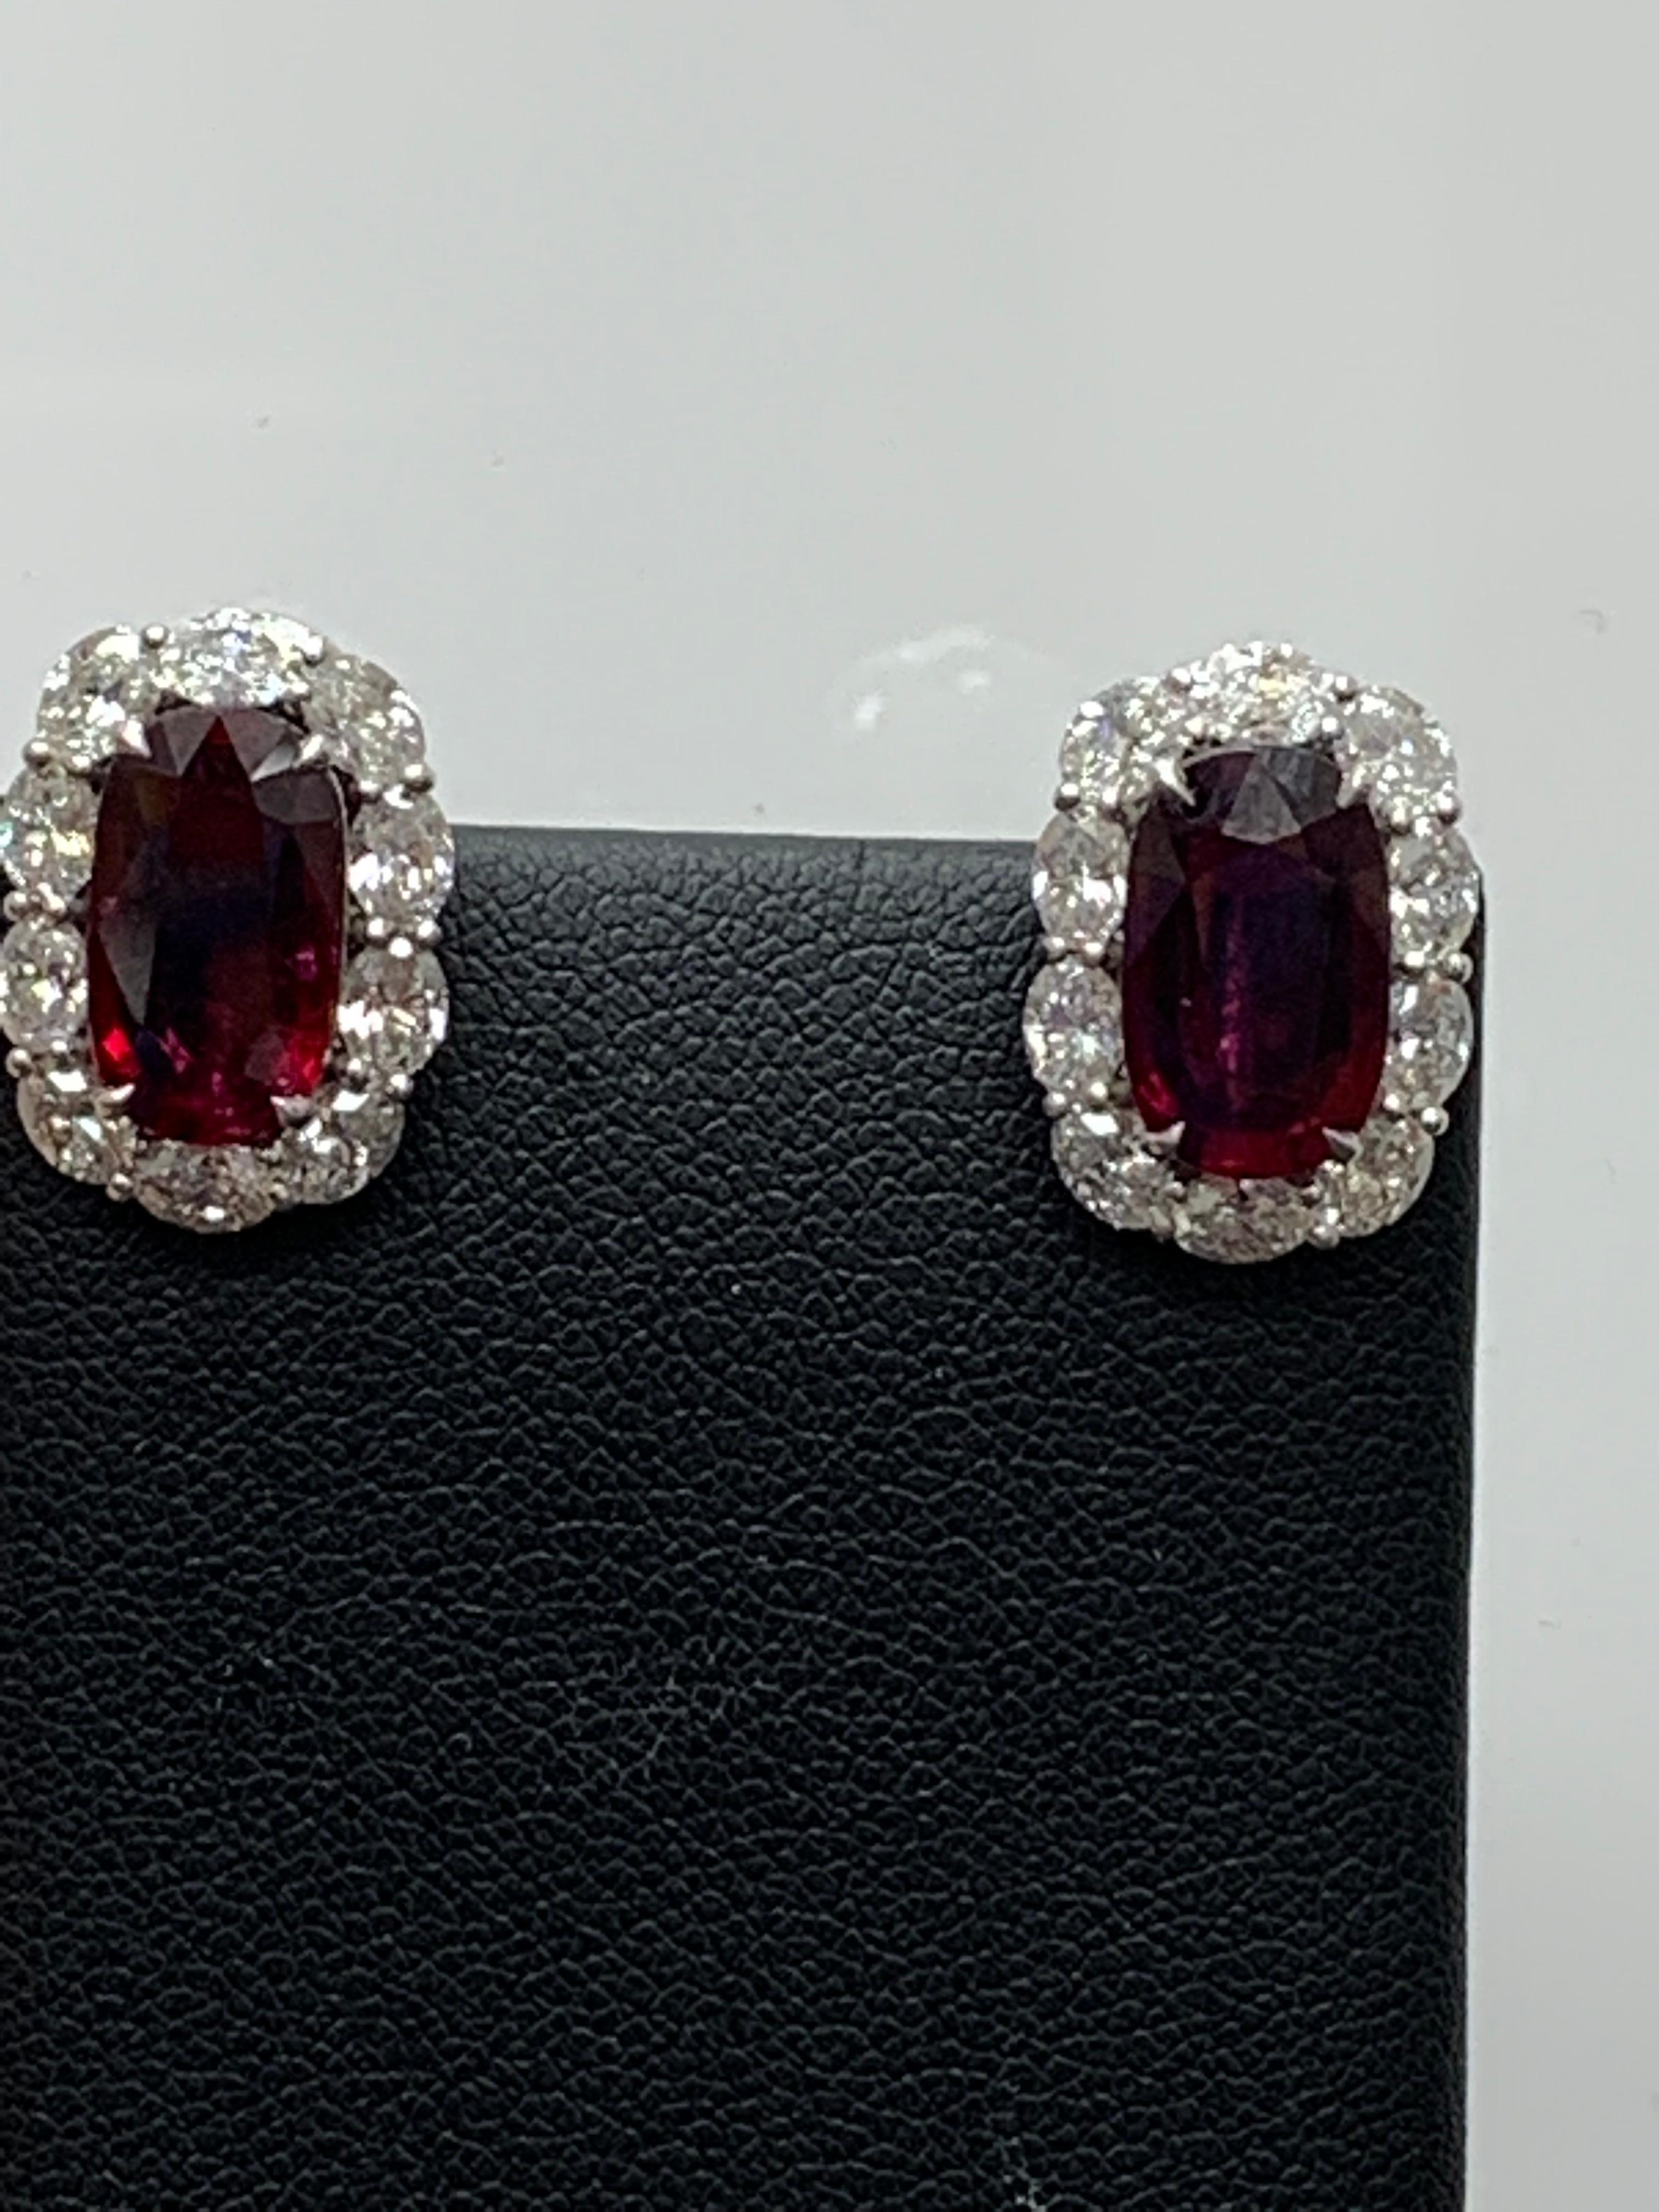 CERTIFIED 6.15 Carat Cushion Cut Ruby and Diamond Halo Earring in 18K White Gold For Sale 1